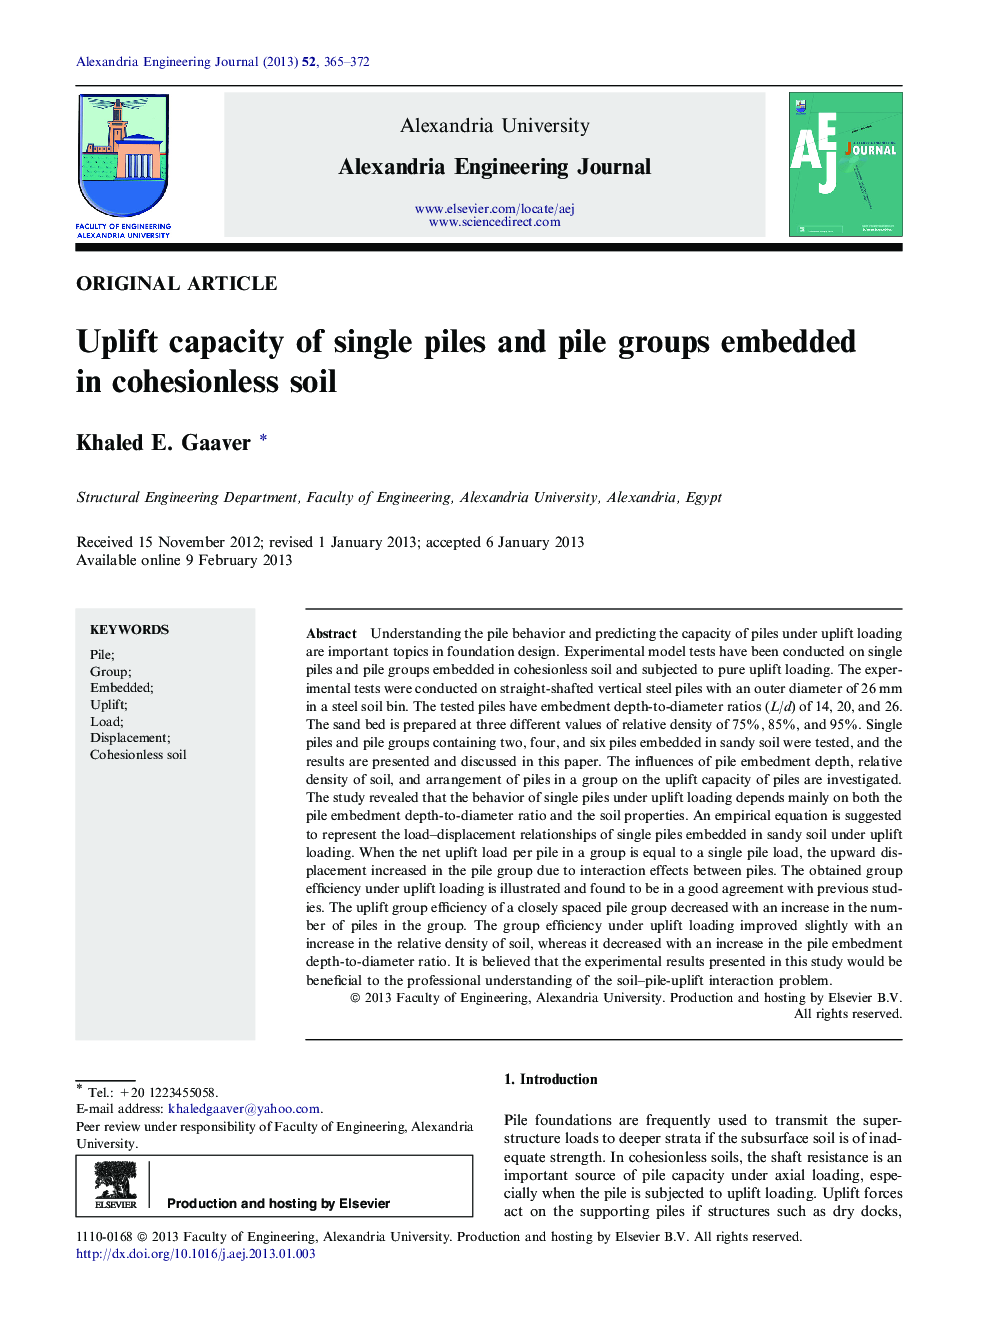 Uplift capacity of single piles and pile groups embedded in cohesionless soil 